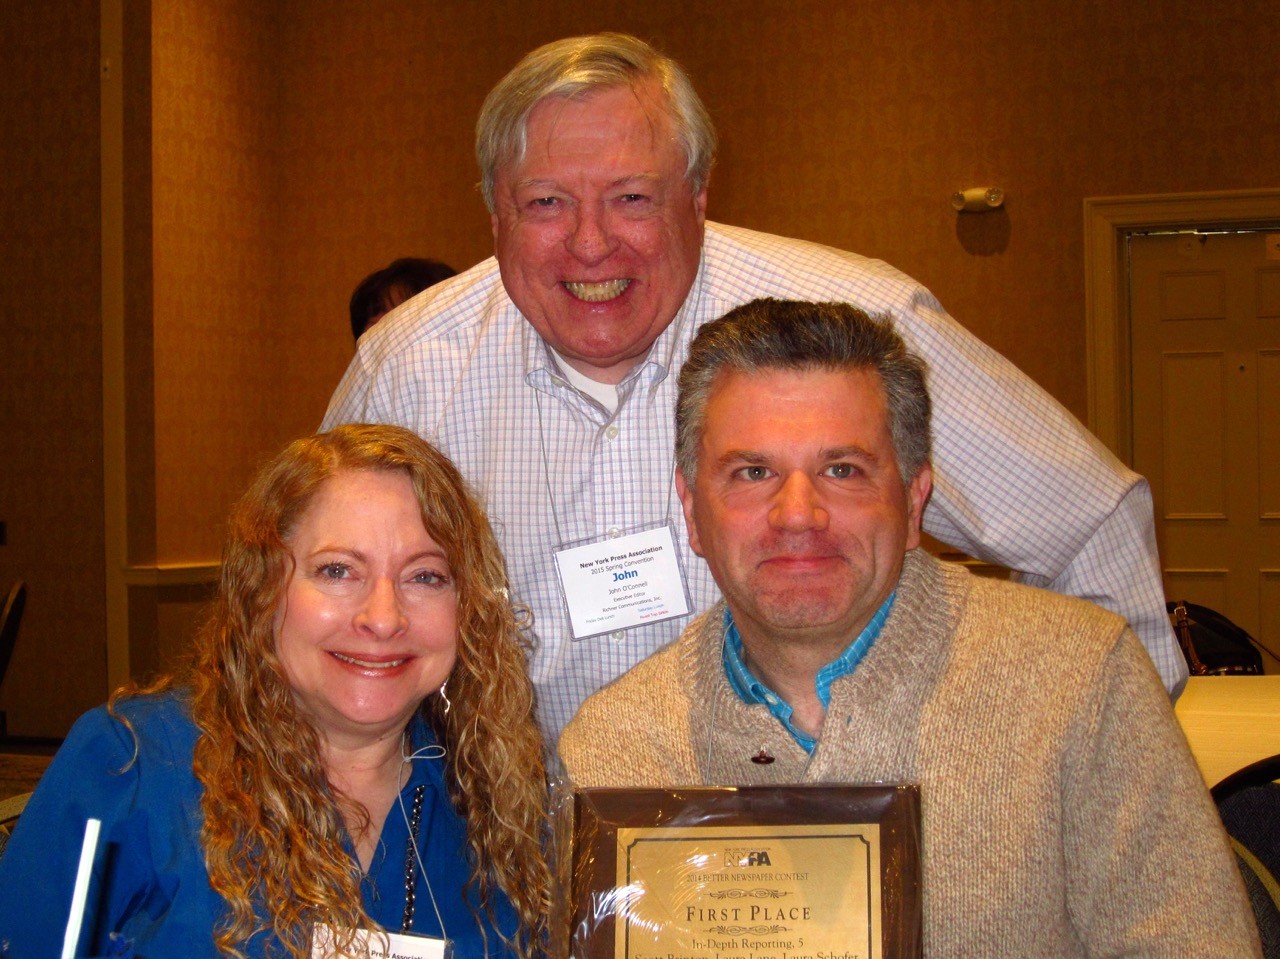 Executive Editor John O'Connell was joined by award-winners Laura Lane and Scott Brinton.